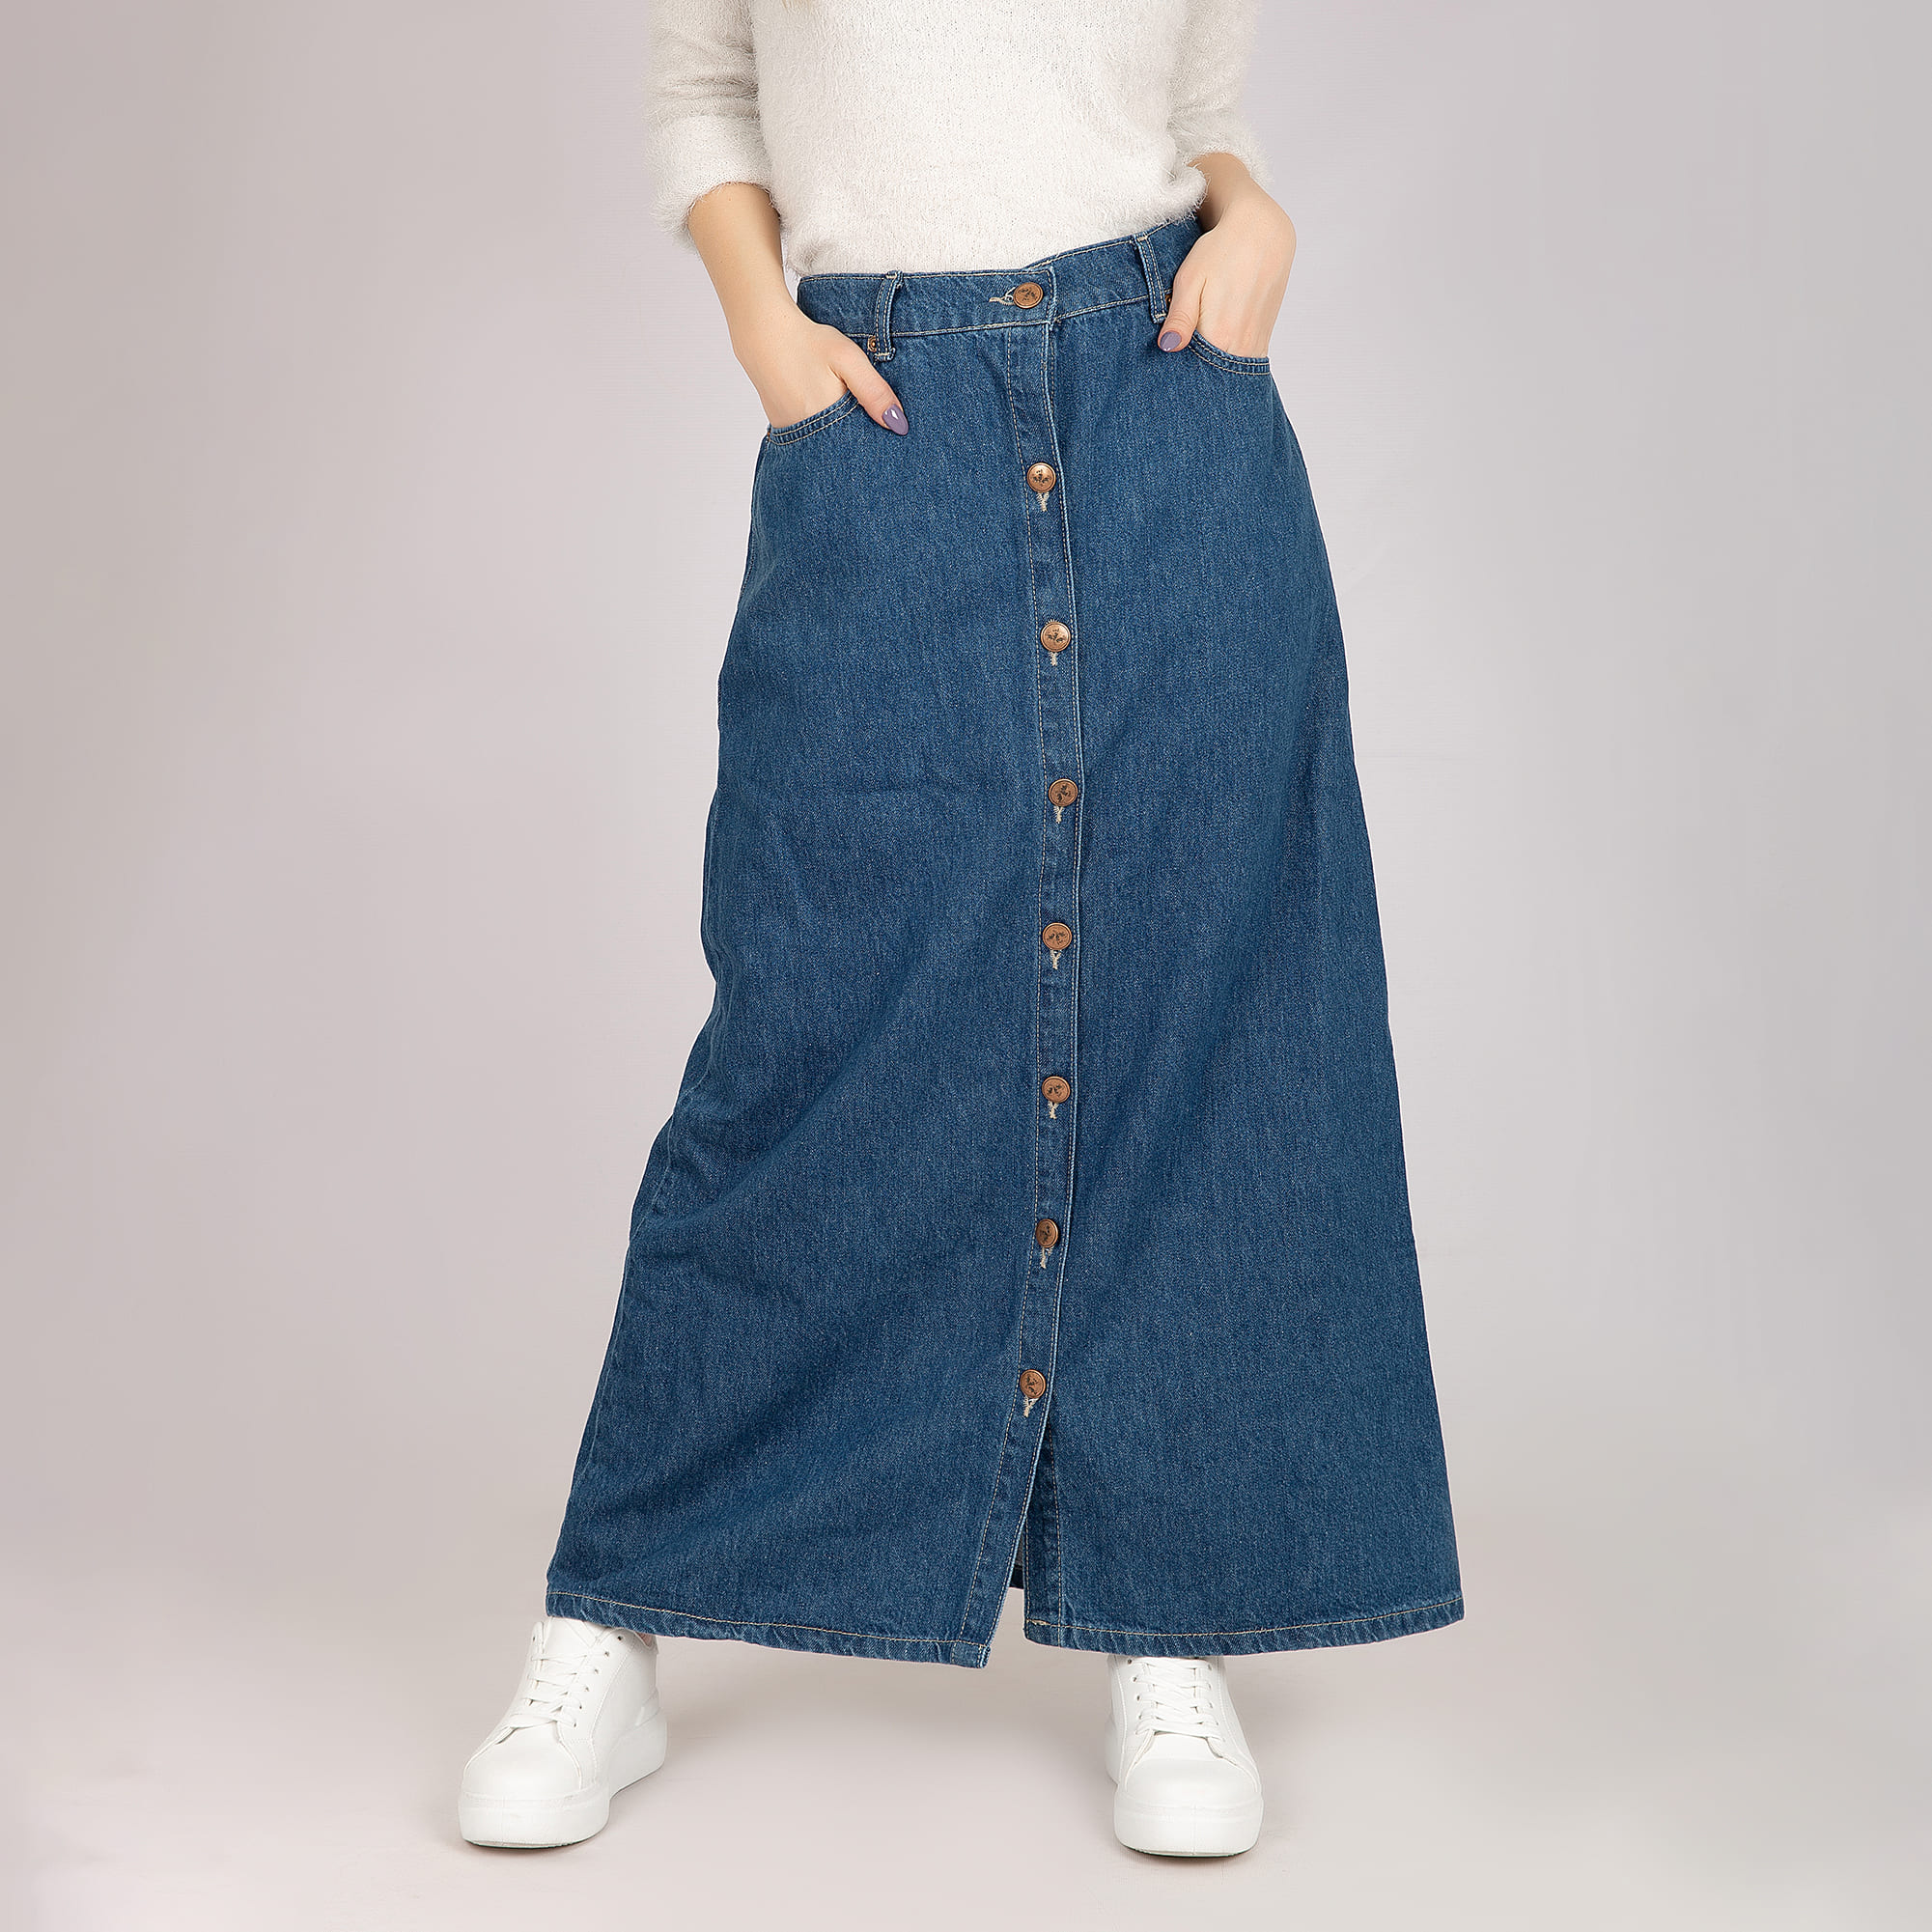 Buy Womens High Waisted Washed Button Front Denim Long Skirt Midi Length A  Line Denim Jean Pencil Skirt, Blue - 592, X-Small at Amazon.in